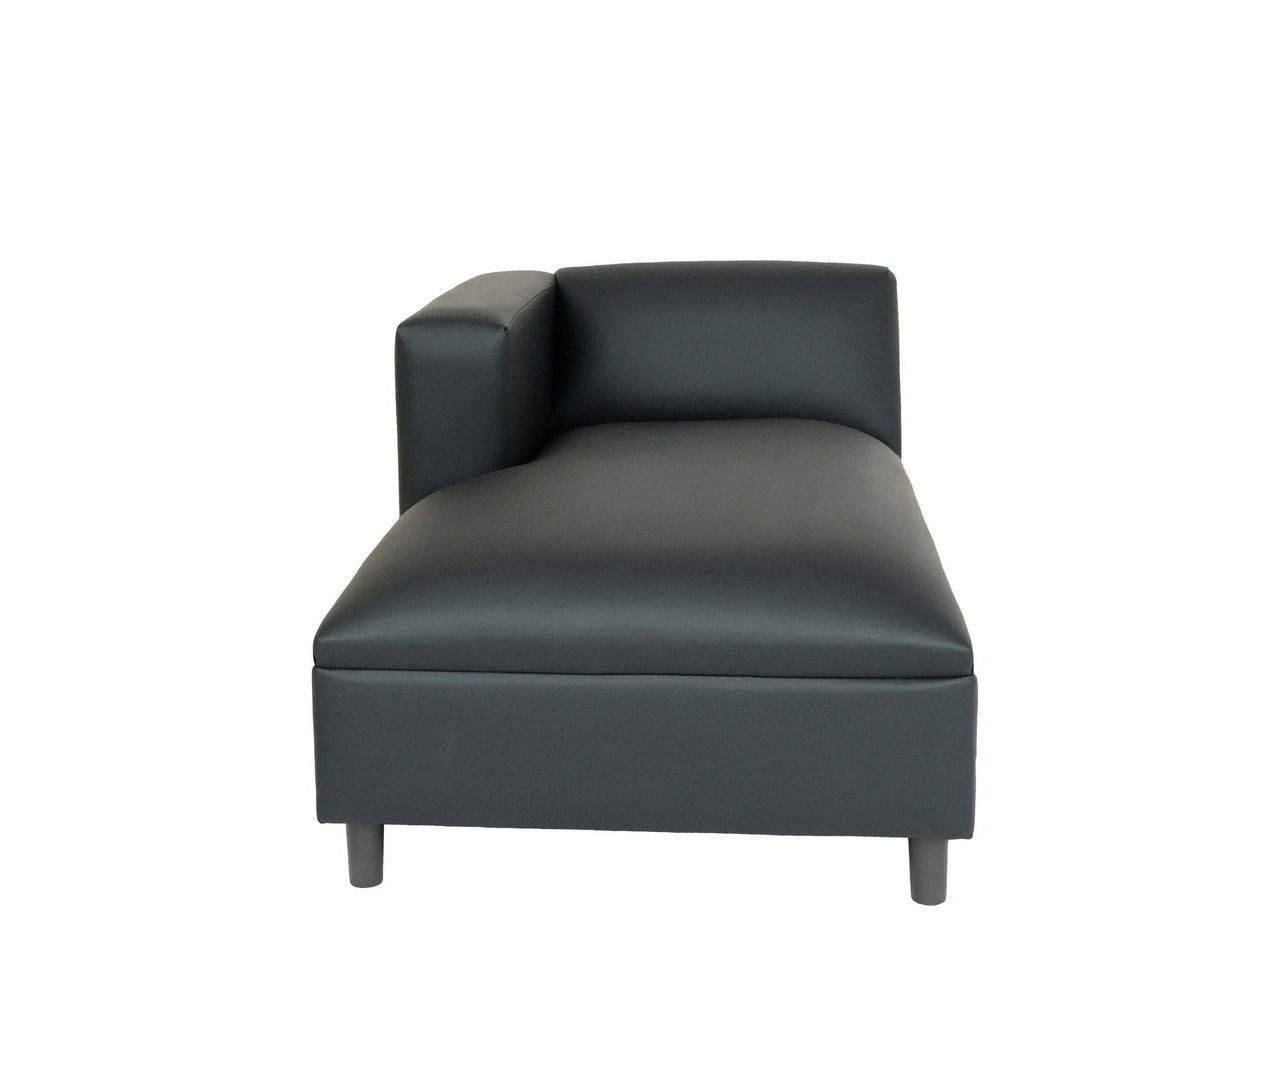 54" Black Faux Leather Lounge Chair